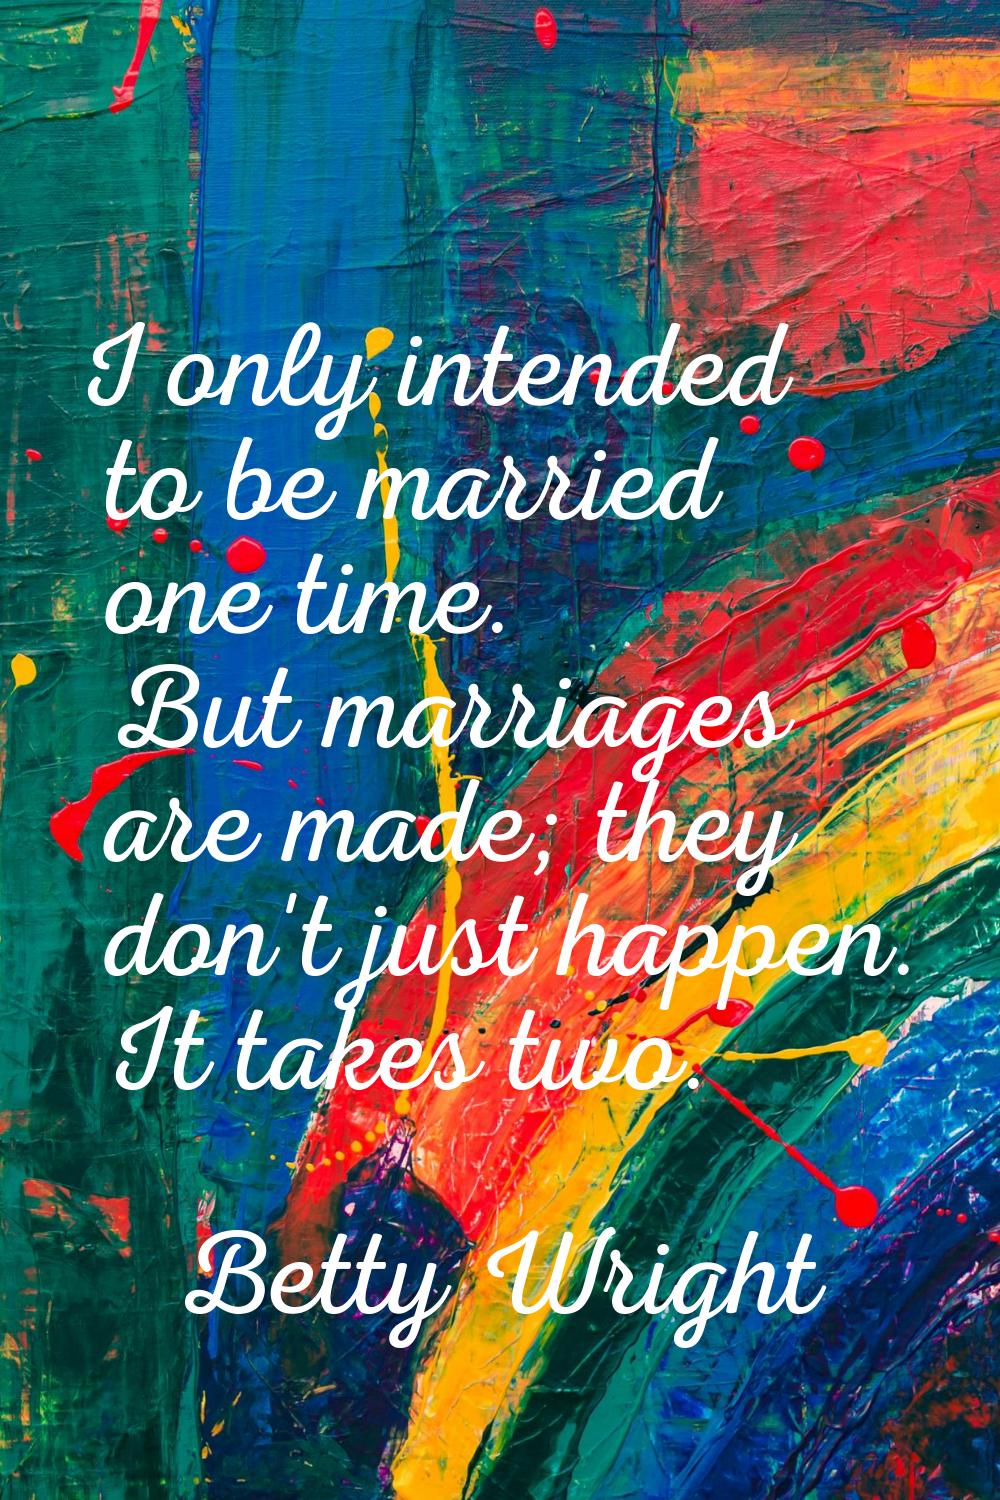 I only intended to be married one time. But marriages are made; they don't just happen. It takes tw